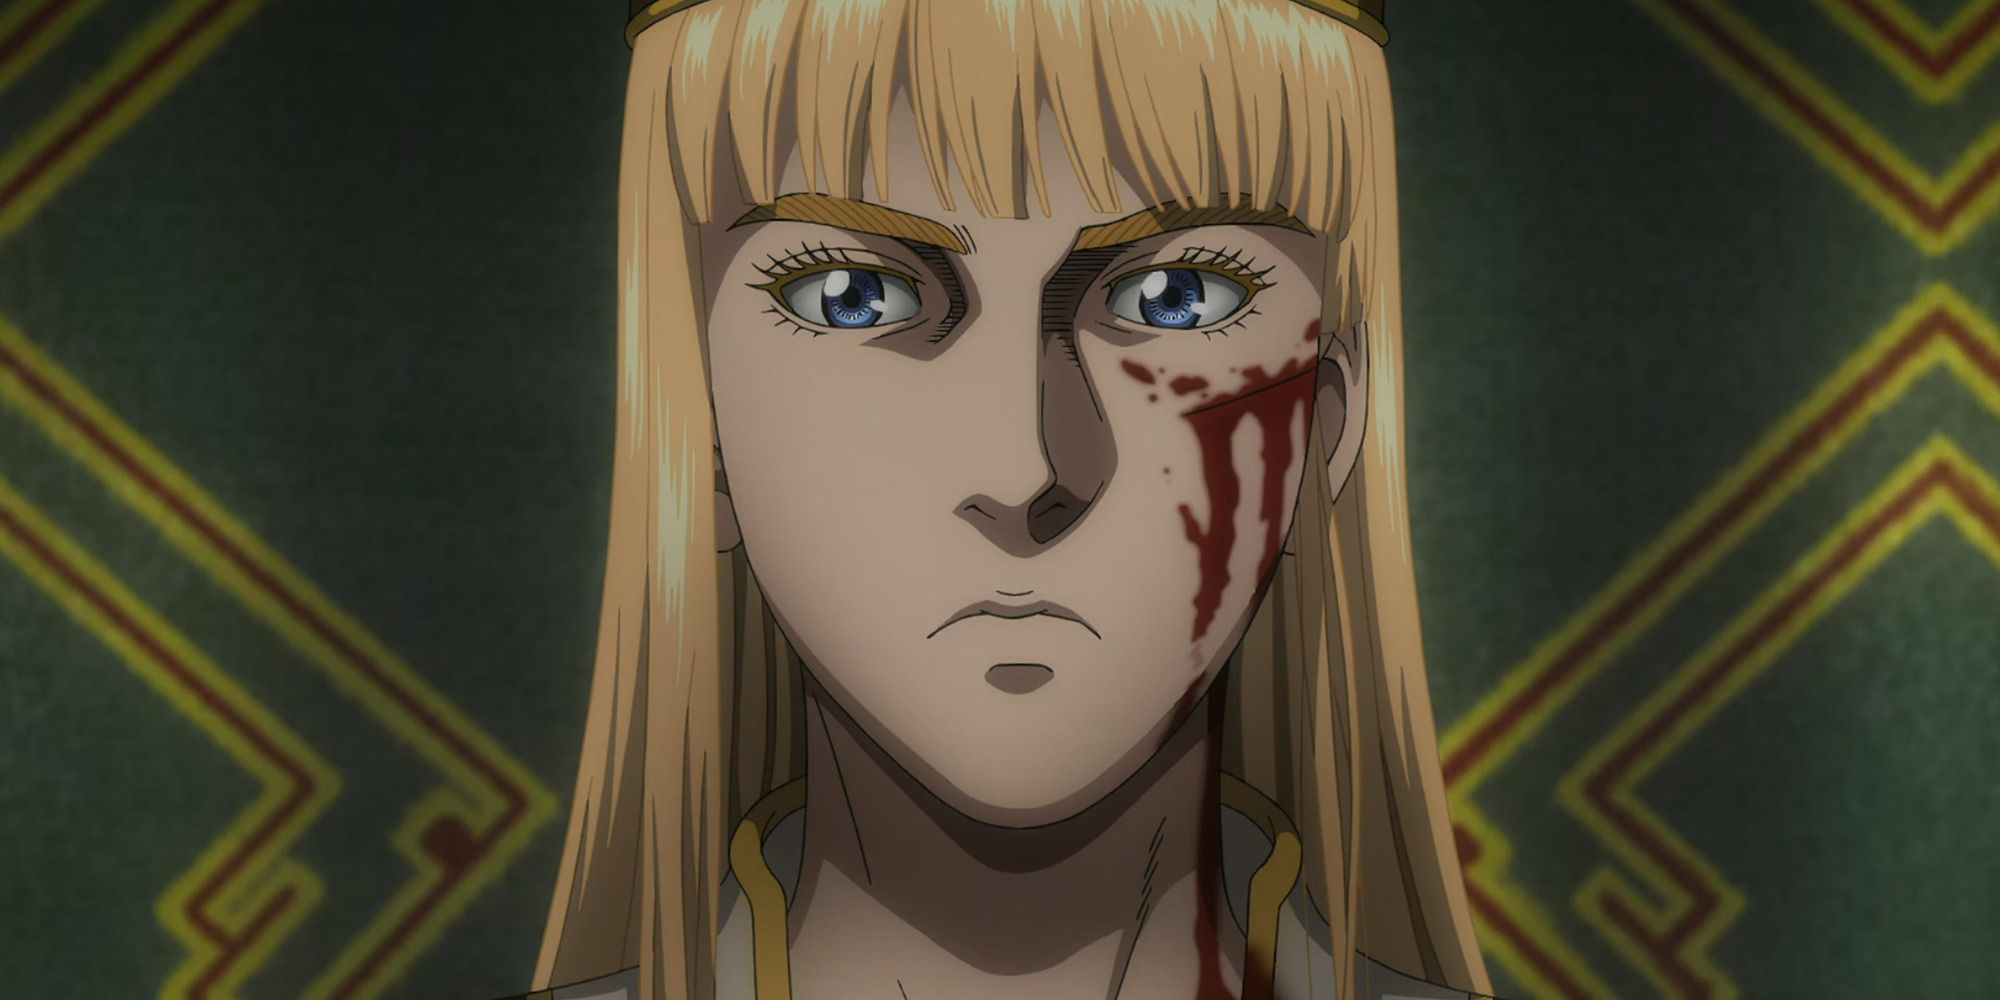 King with a bloody cut on his cheek from 'Vinland Saga'